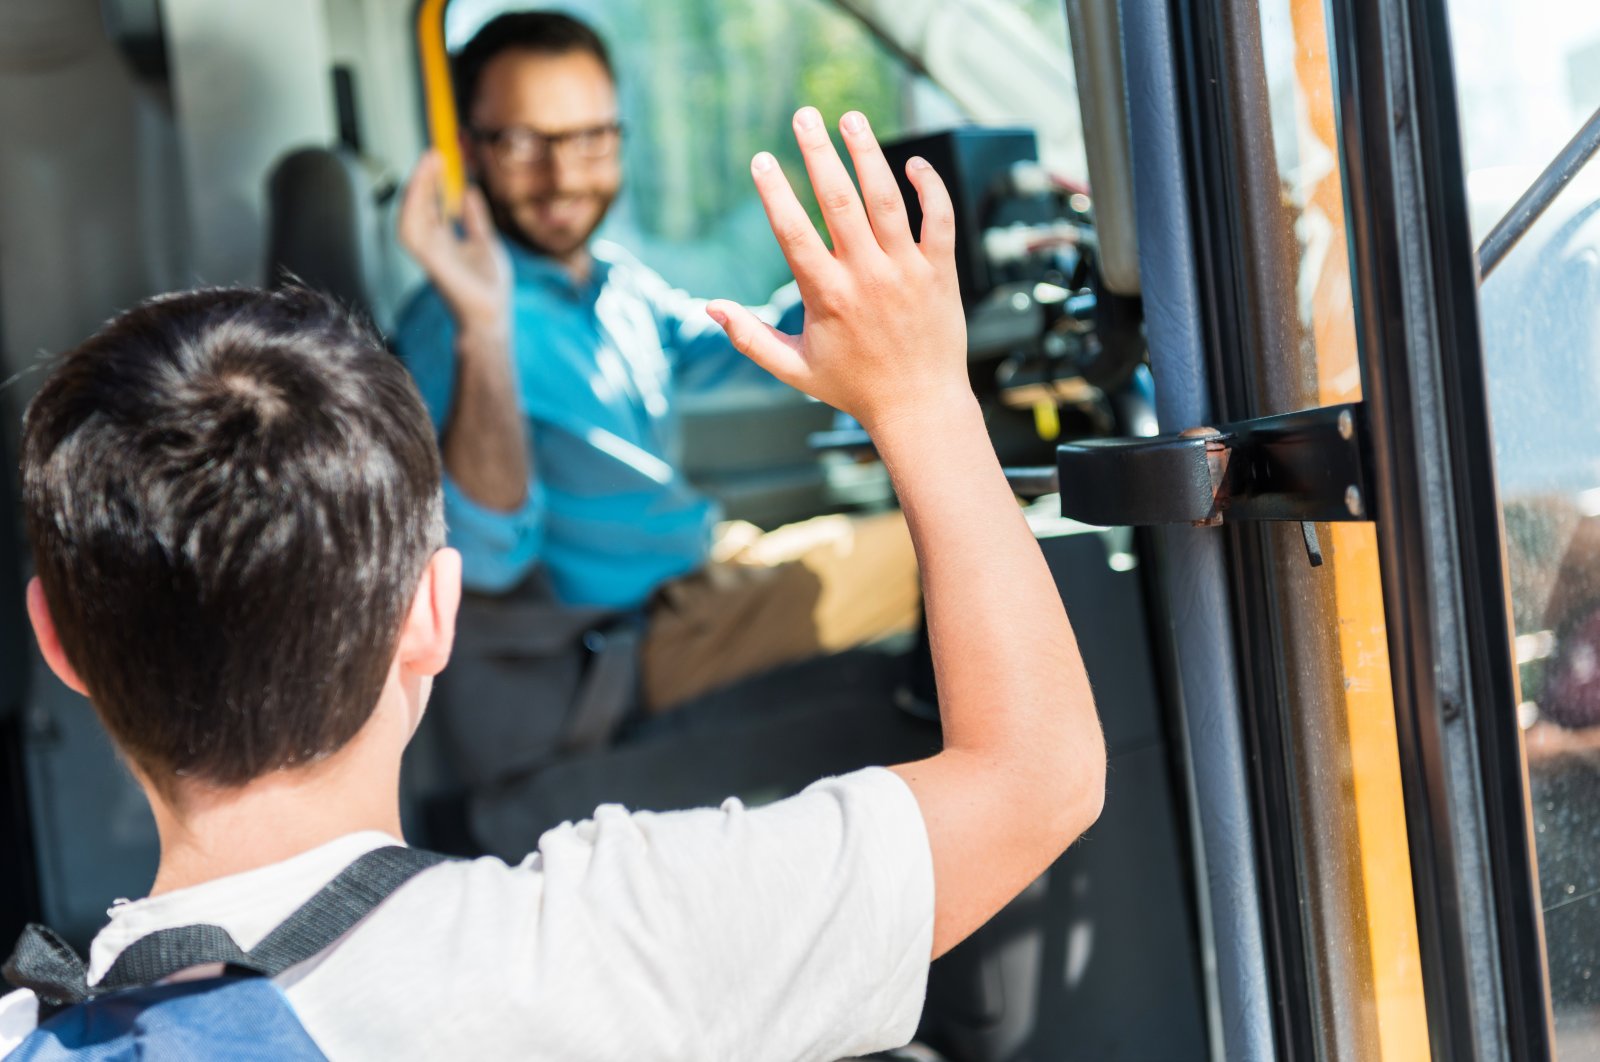 Study reveals that saying “good morning” or “thank you” had a positive impact on bus drivers&#039; happiness and job satisfaction. (Shutterstock Photo)